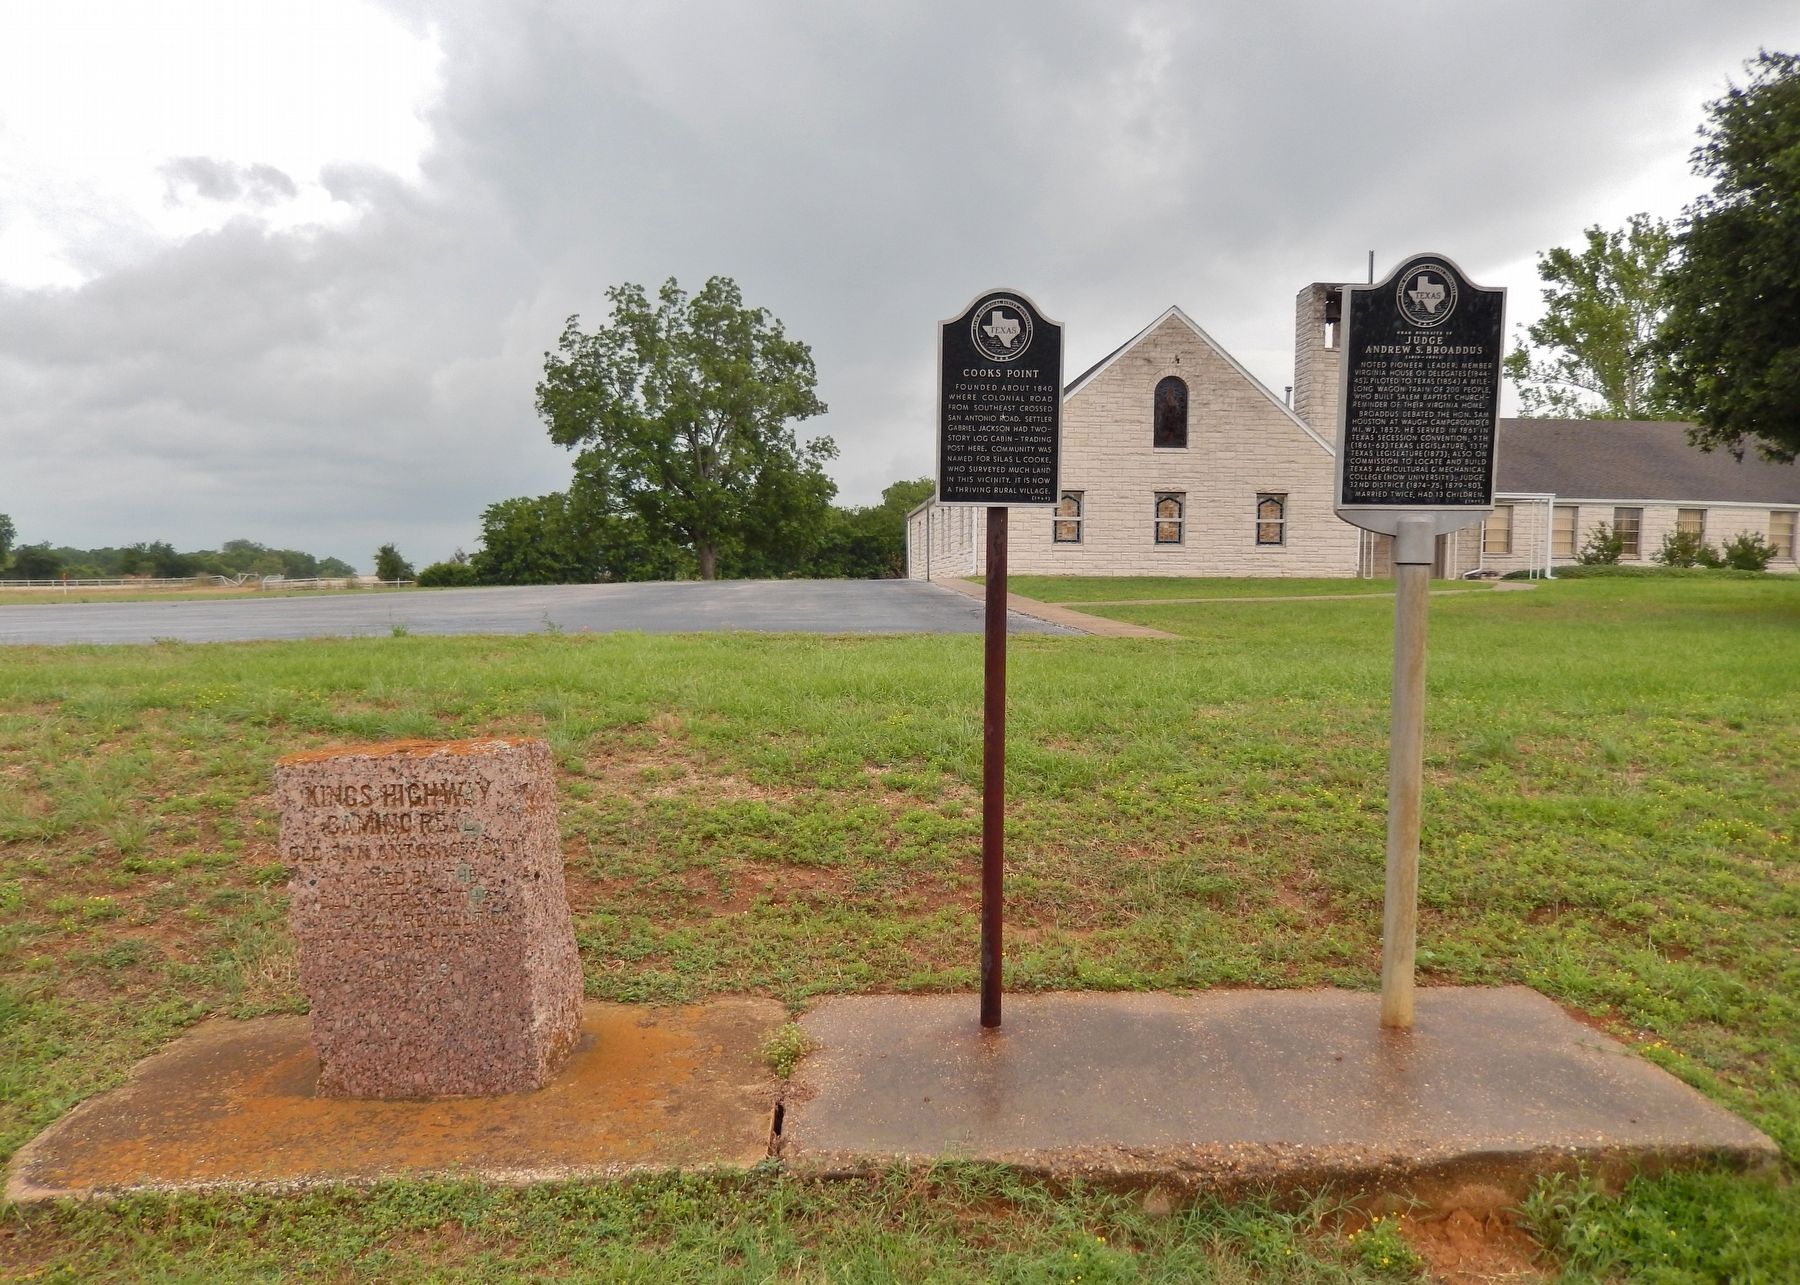 Near Homesite of Judge Andrew S. Broaddus Marker (<i>wide view showing adjacent markers</i>) image. Click for full size.